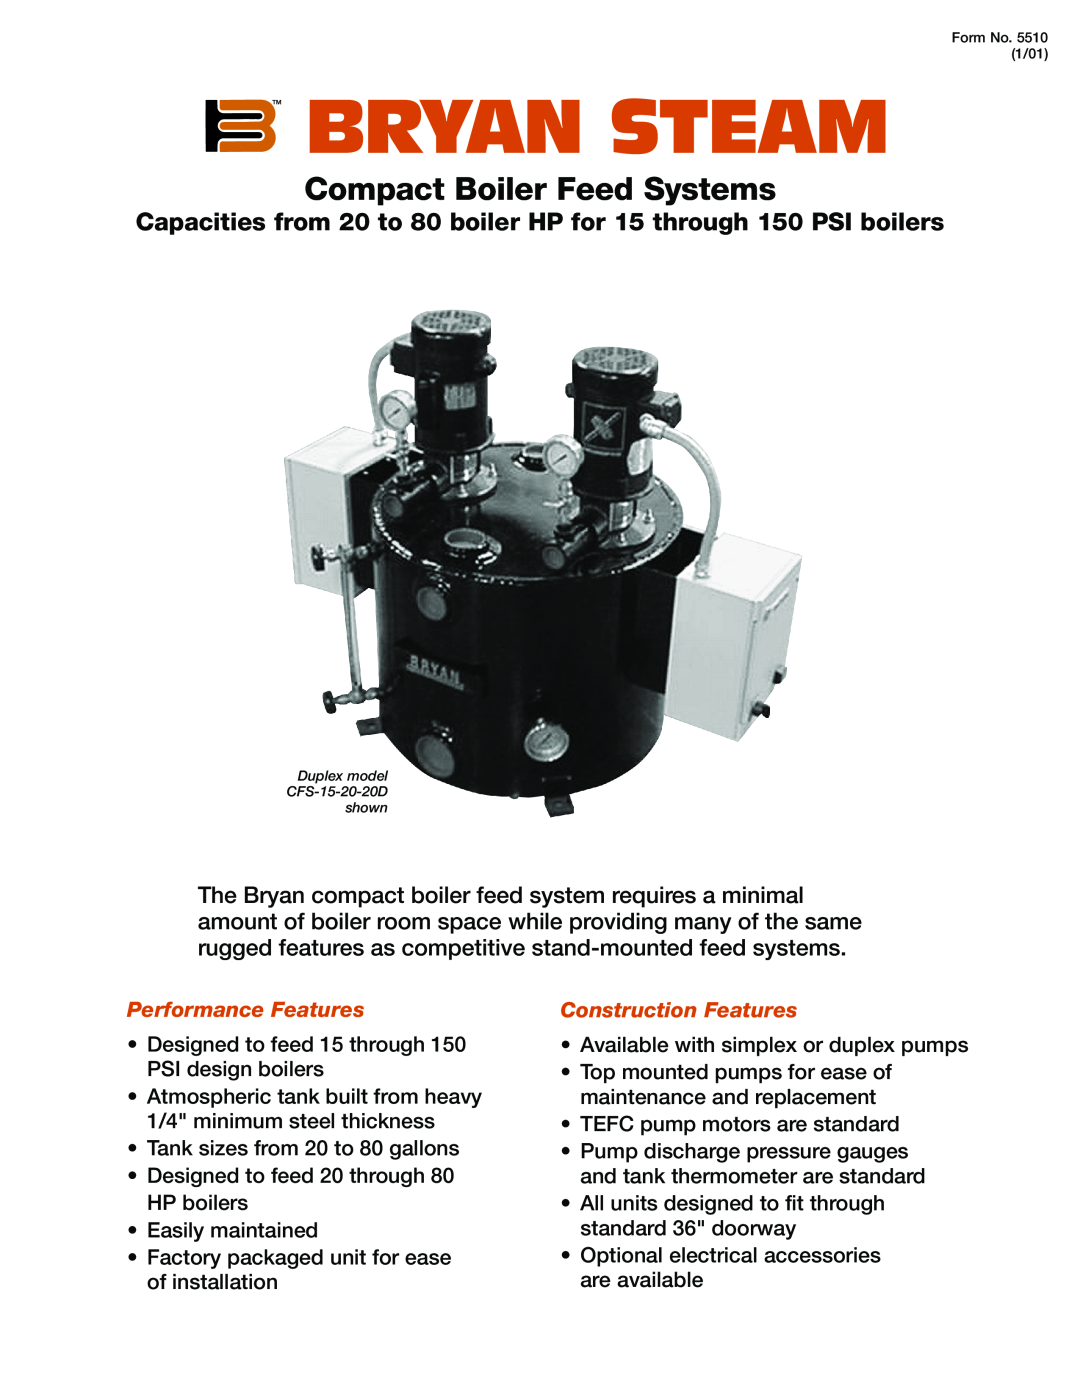 Bryan Boilers CFS-15-20-20D manual Bryan Steam, Compact Boiler Feed Systems, Performance Features, Construction Features 